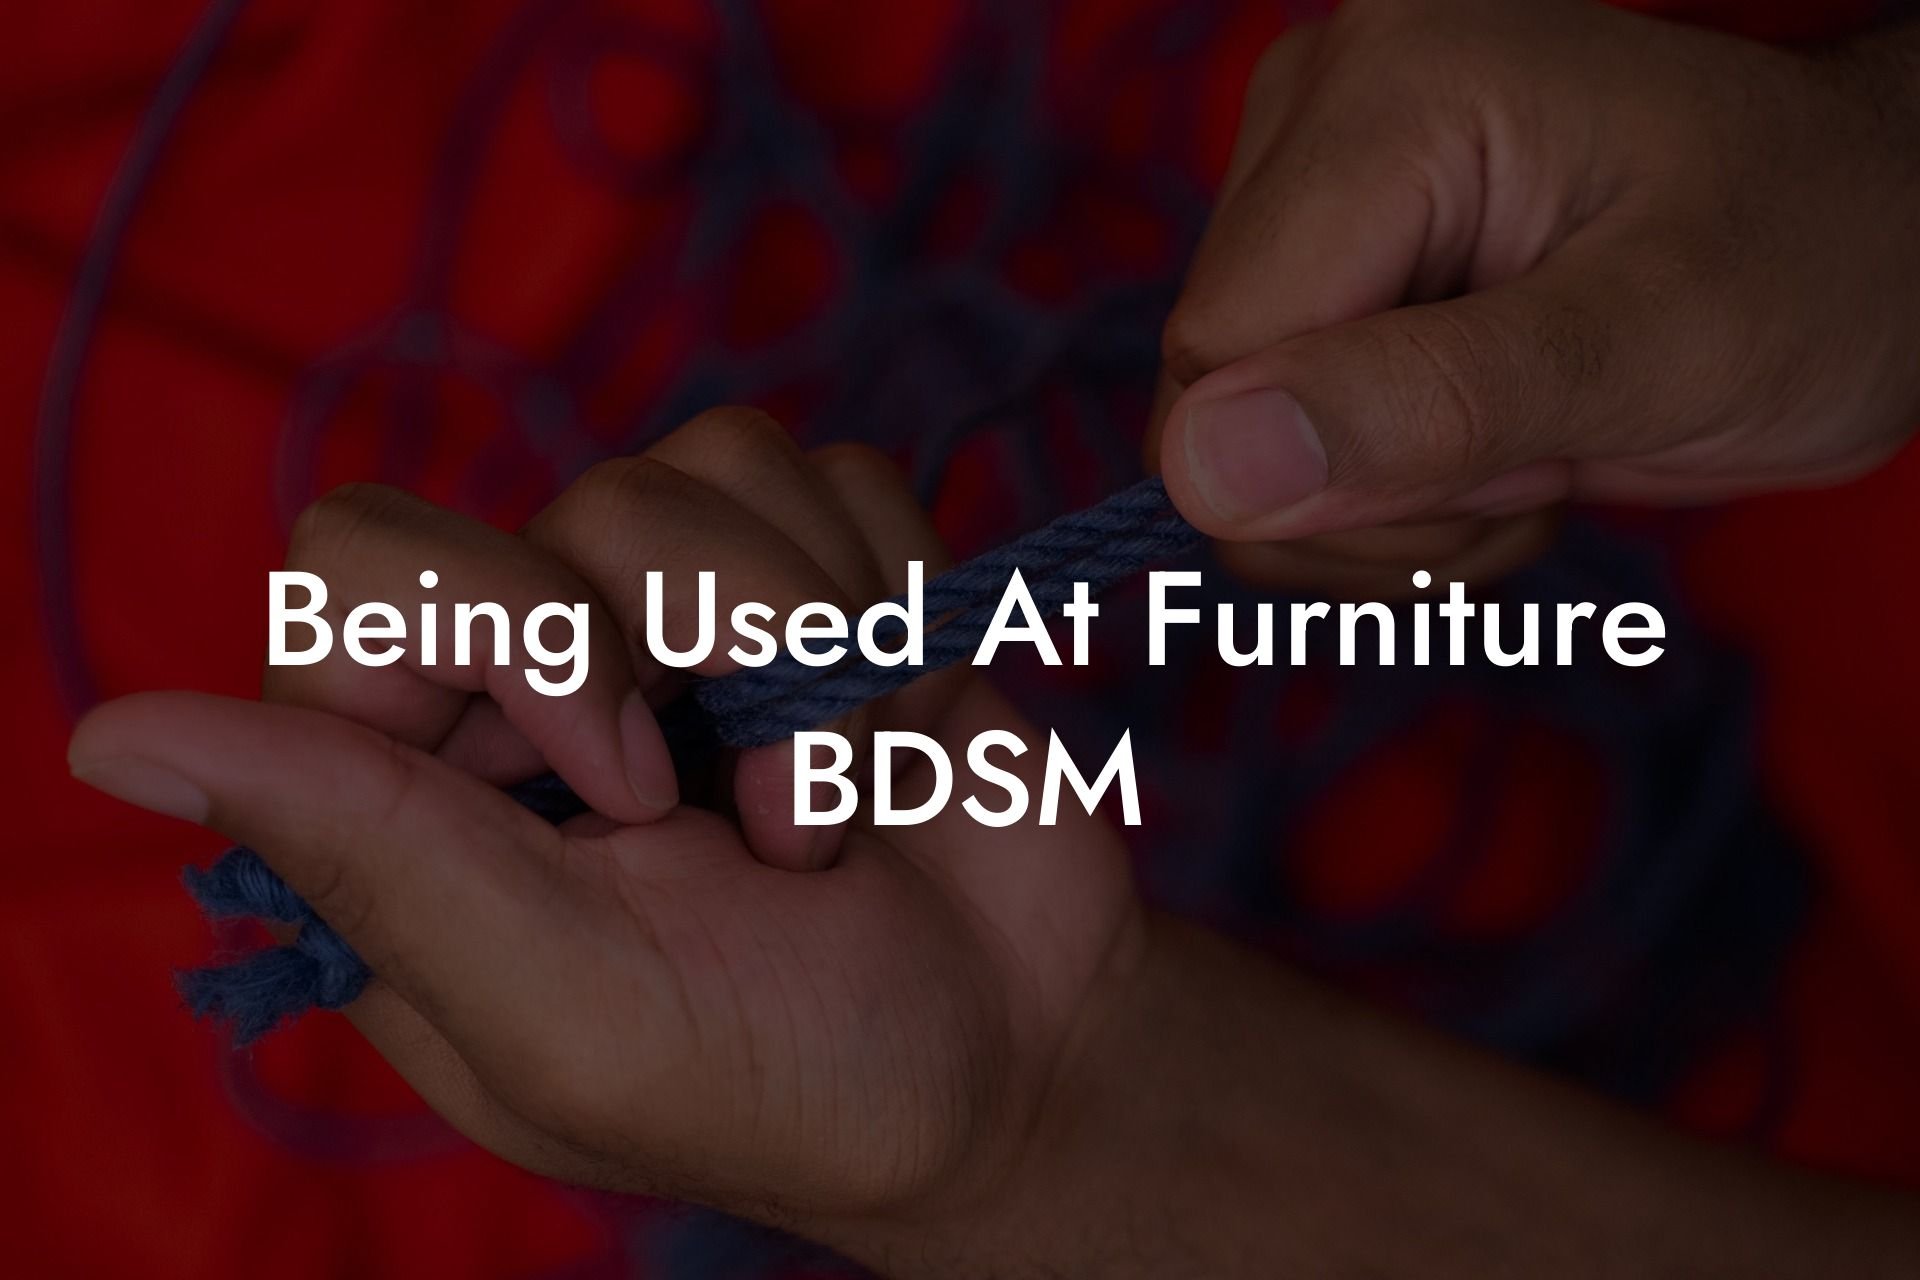 Being Used At Furniture BDSM